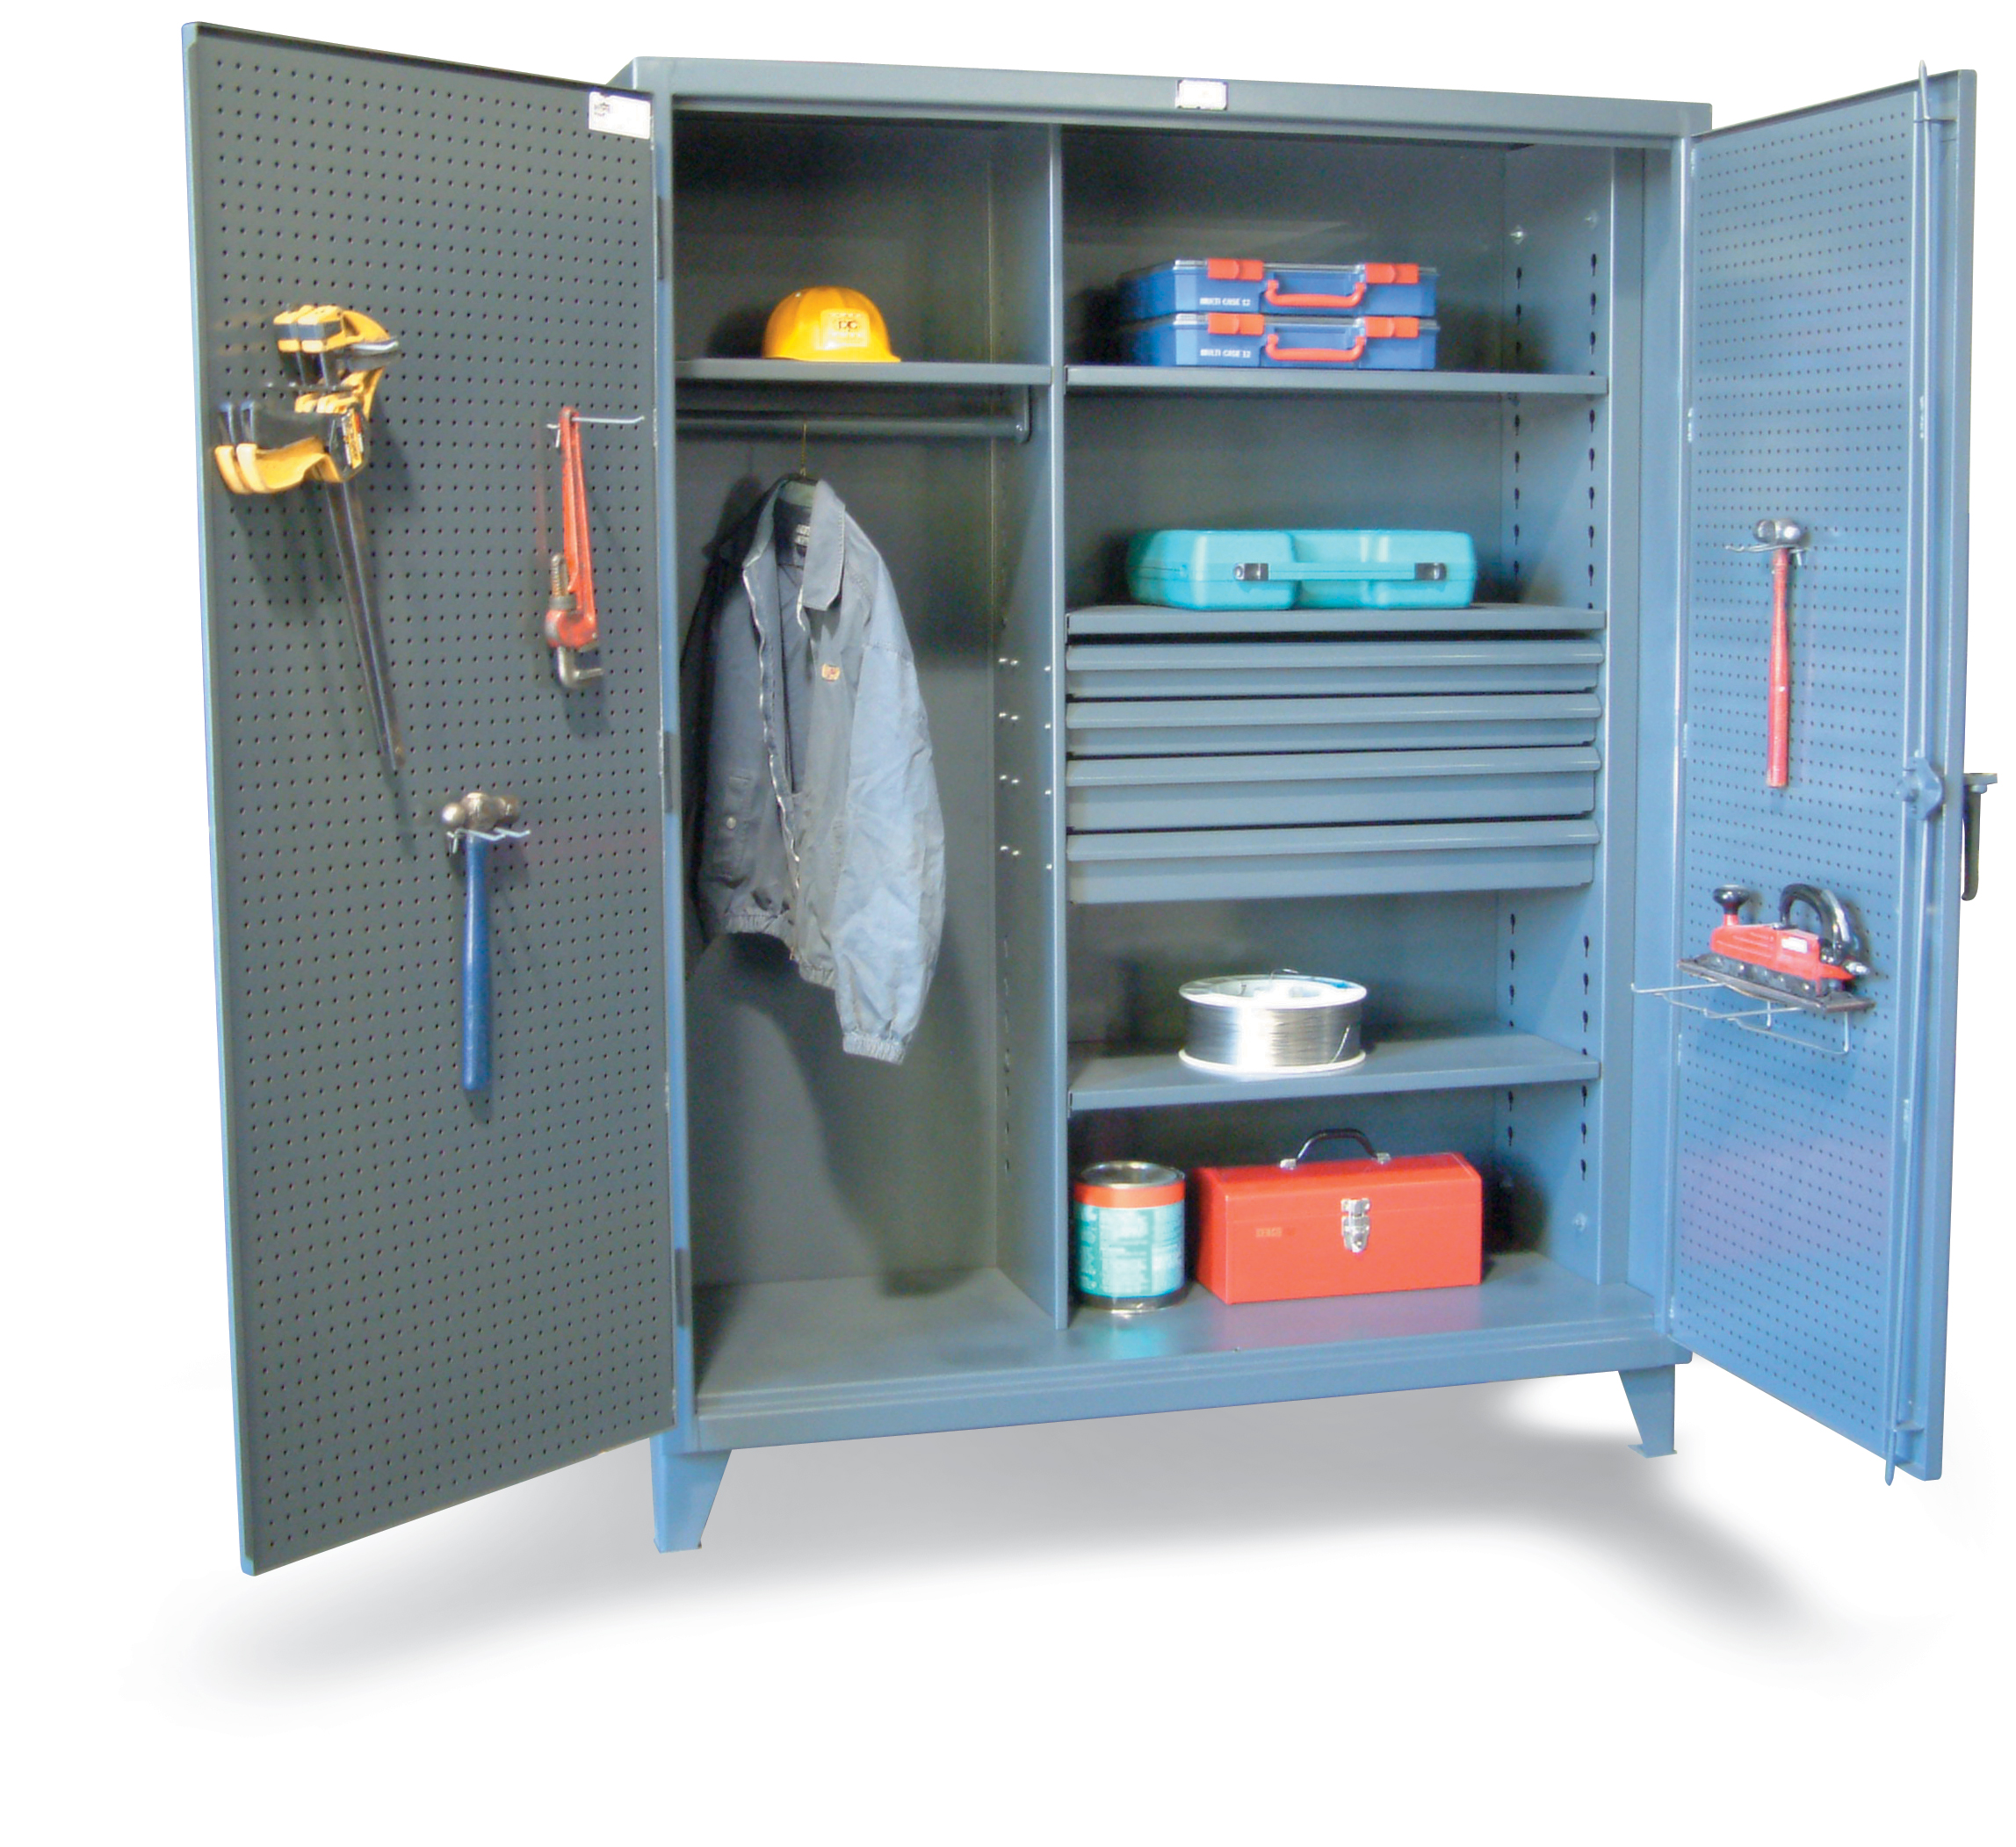 Half Width Shelf for 60w x 24d All-Welded Combination Storage Cabinets